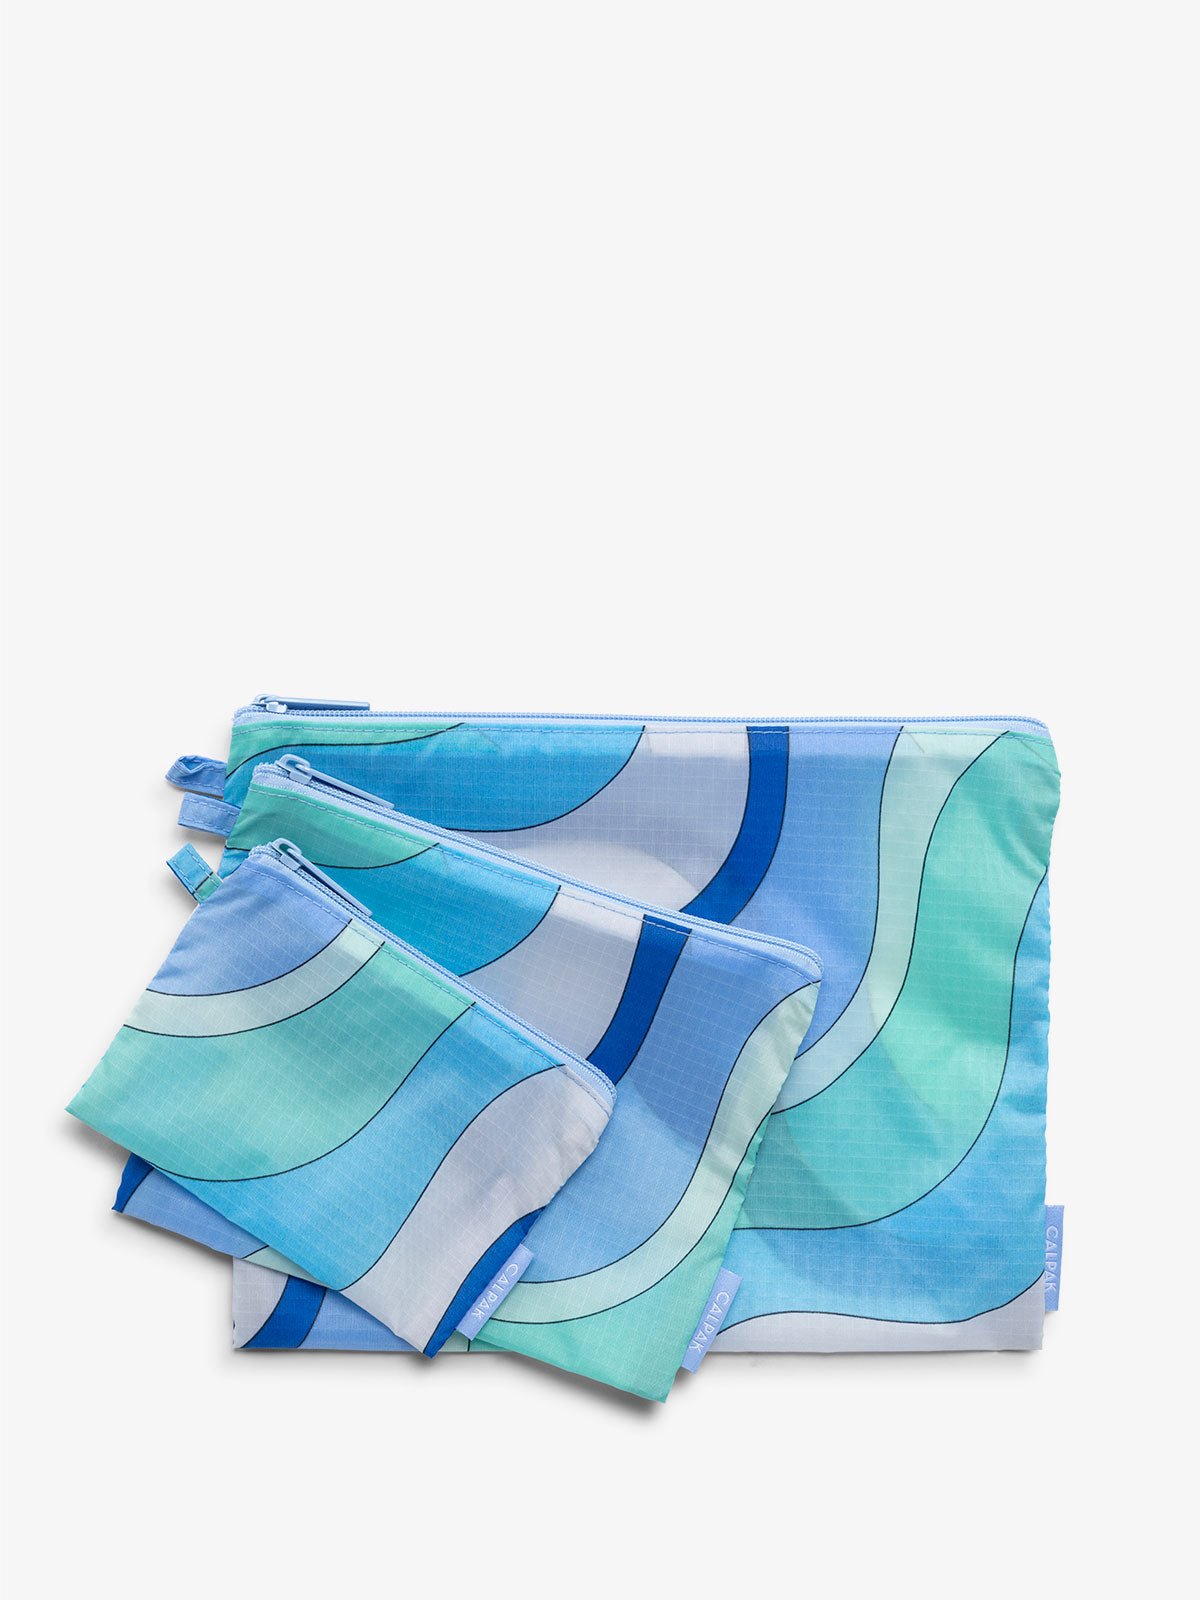 set of storage pouches for luggage travel in wavy blue pattern